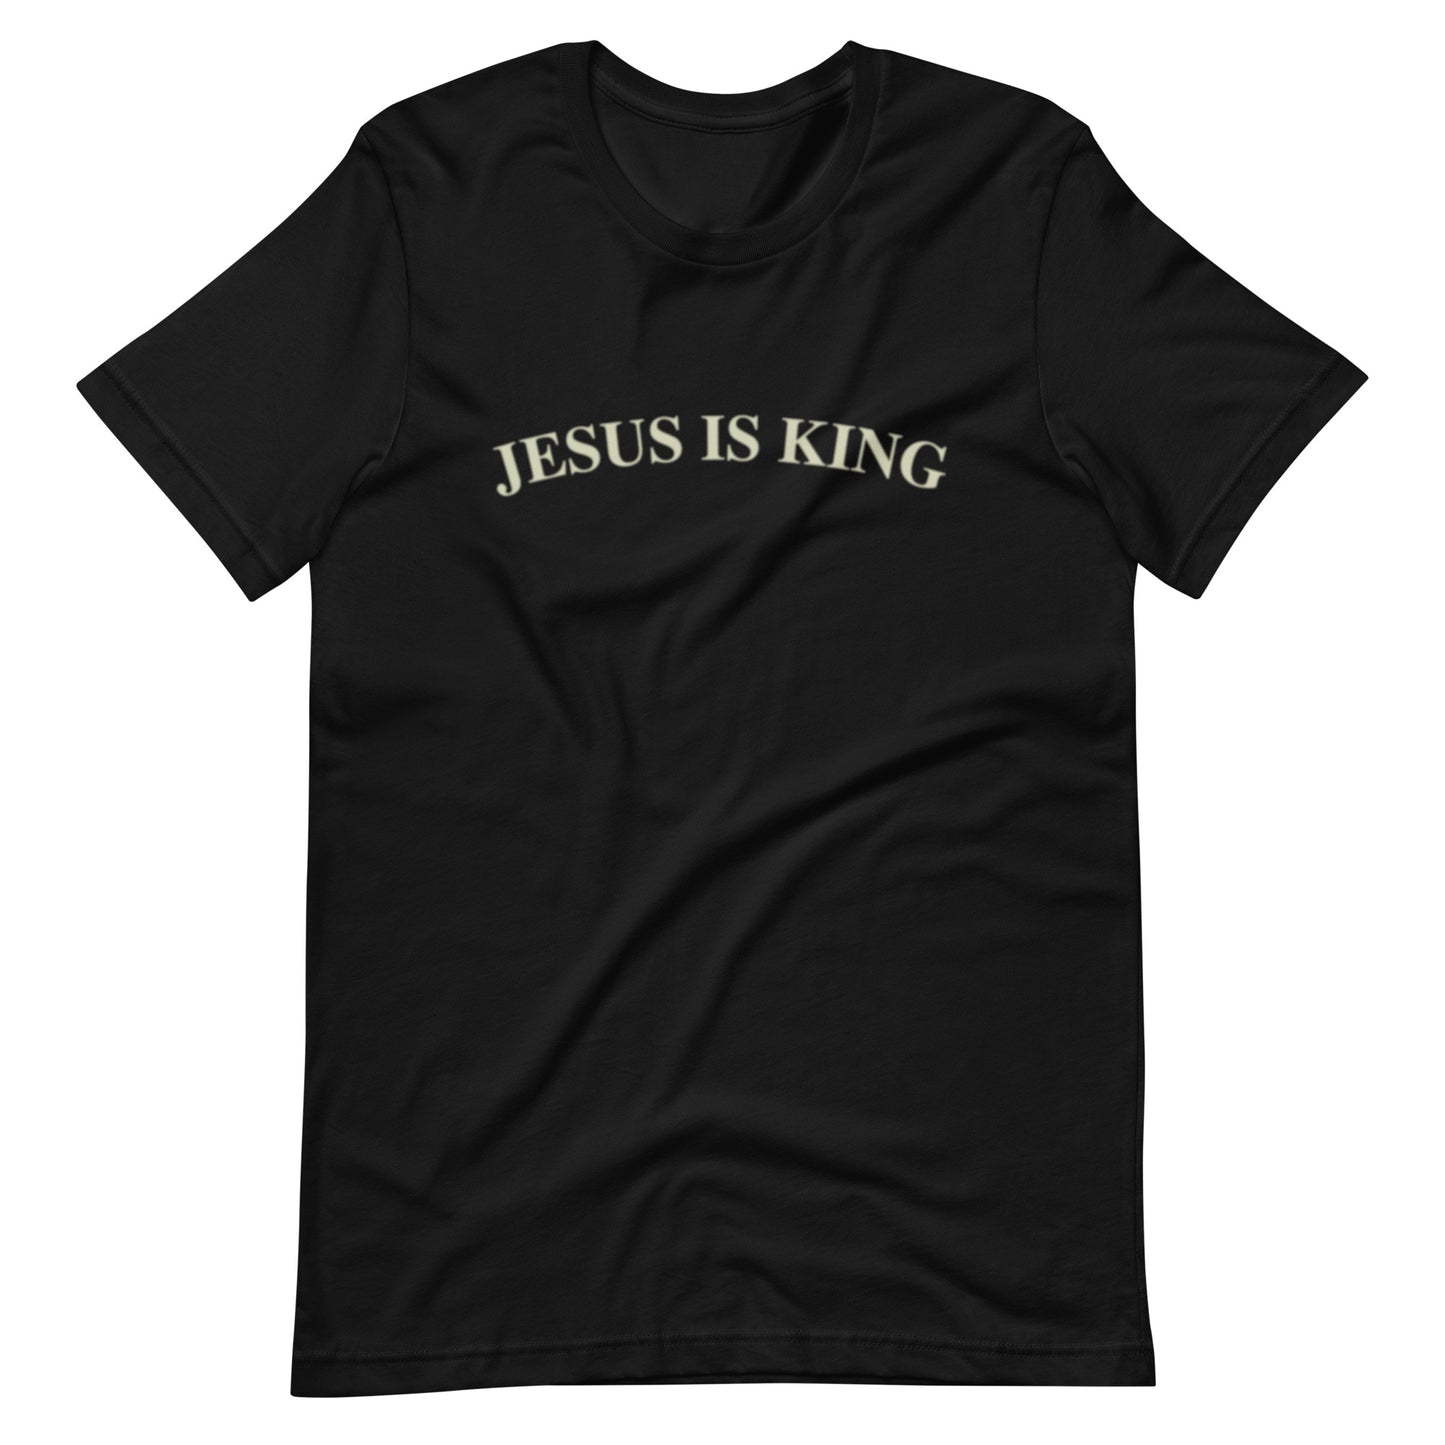 Jesus Is King in Beige (Center City Collection) Unisex t-shirt